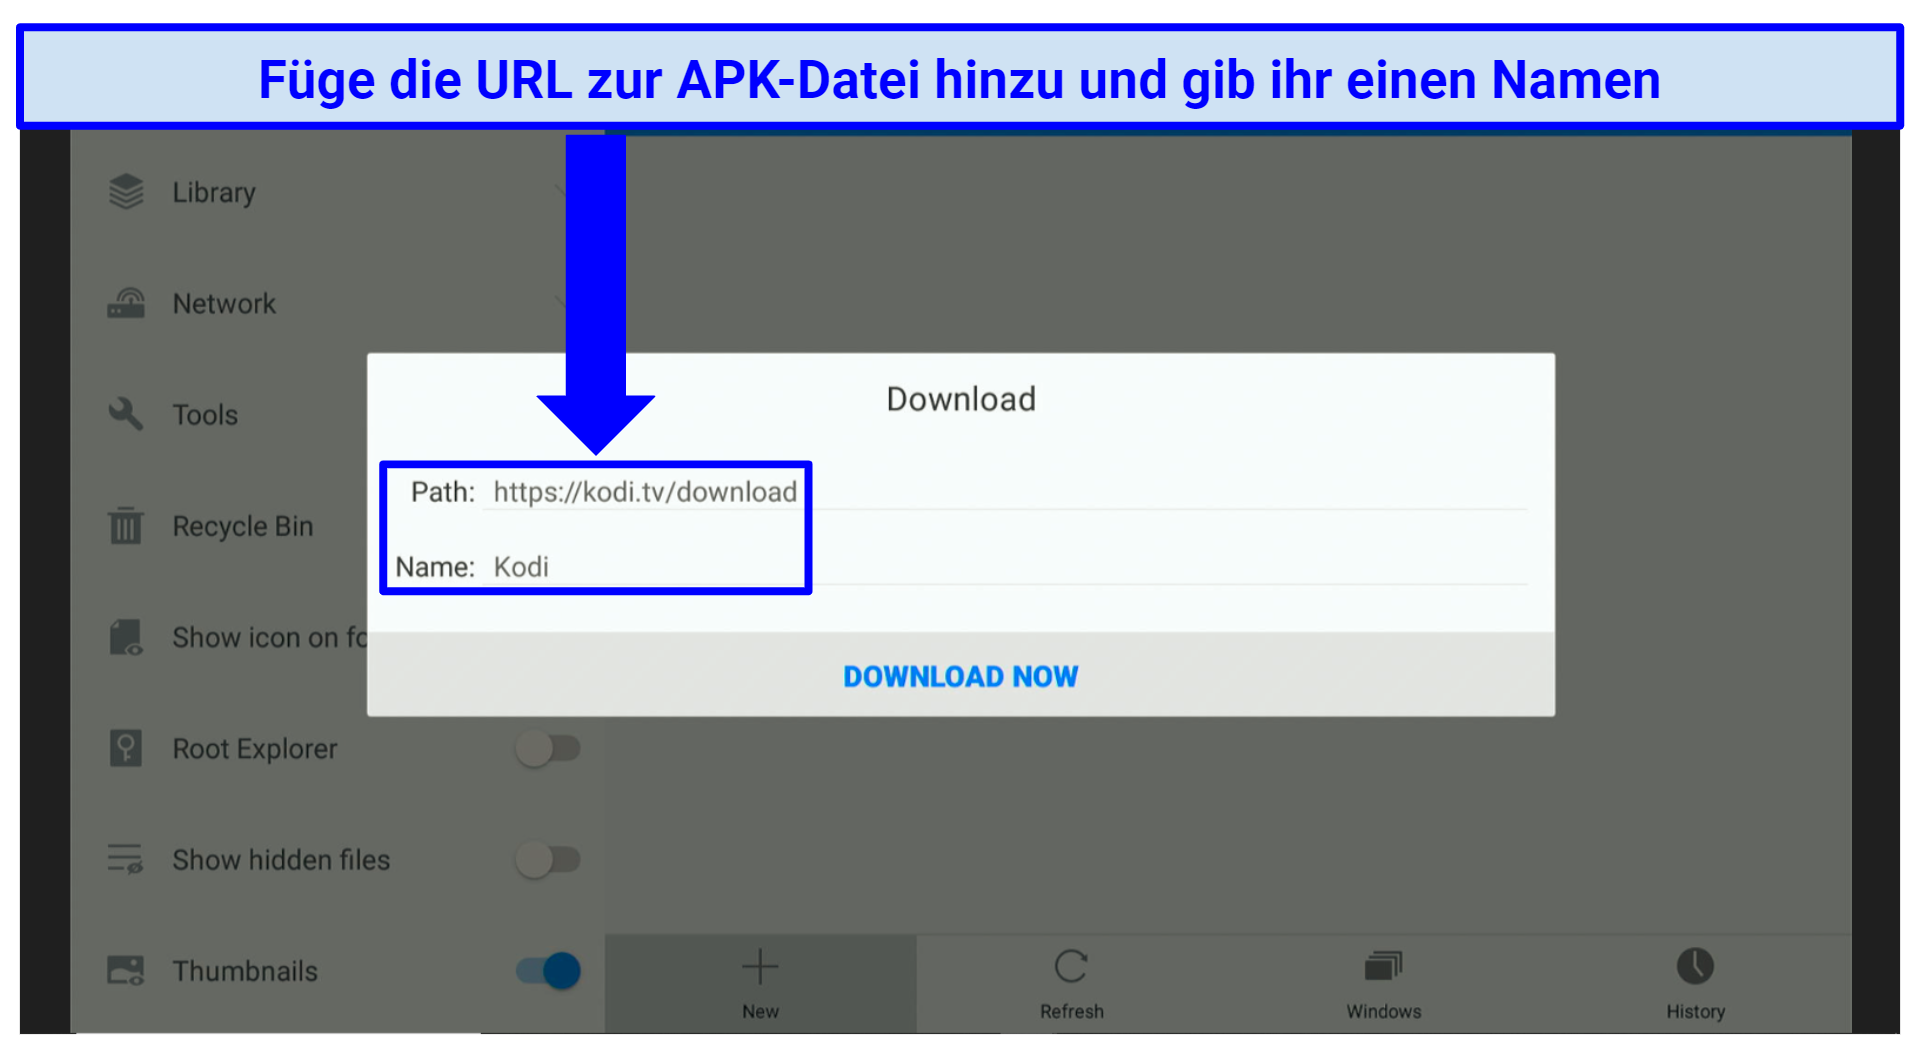 A screenshot showing it's easy to add the URL of an APK file and give it a name in Firestick.